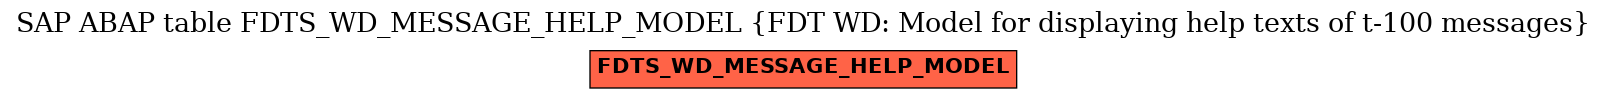 E-R Diagram for table FDTS_WD_MESSAGE_HELP_MODEL (FDT WD: Model for displaying help texts of t-100 messages)